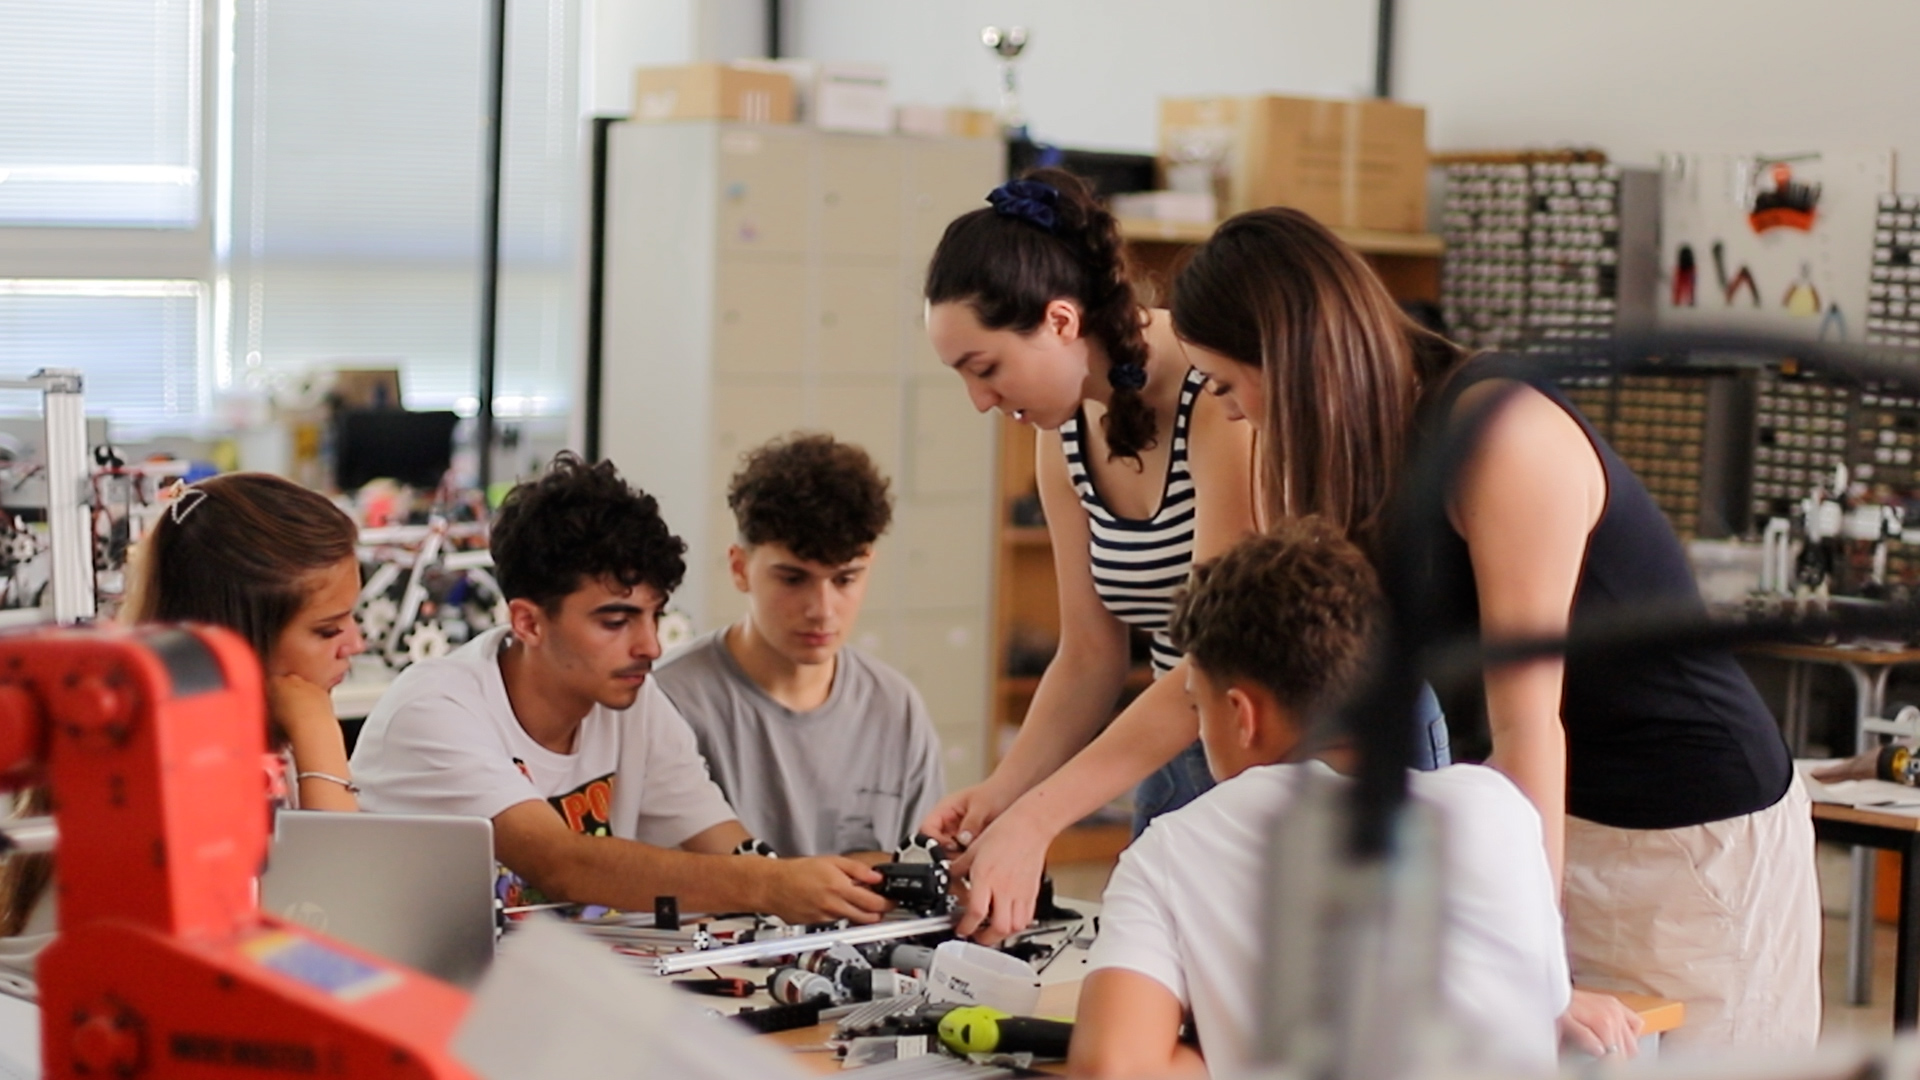 The Faculty of Mechatronics Engineering at UBT, a Hub of Latest Innovations in the Field of Artificial Intelligence and Robotics in Kosovo and the Region